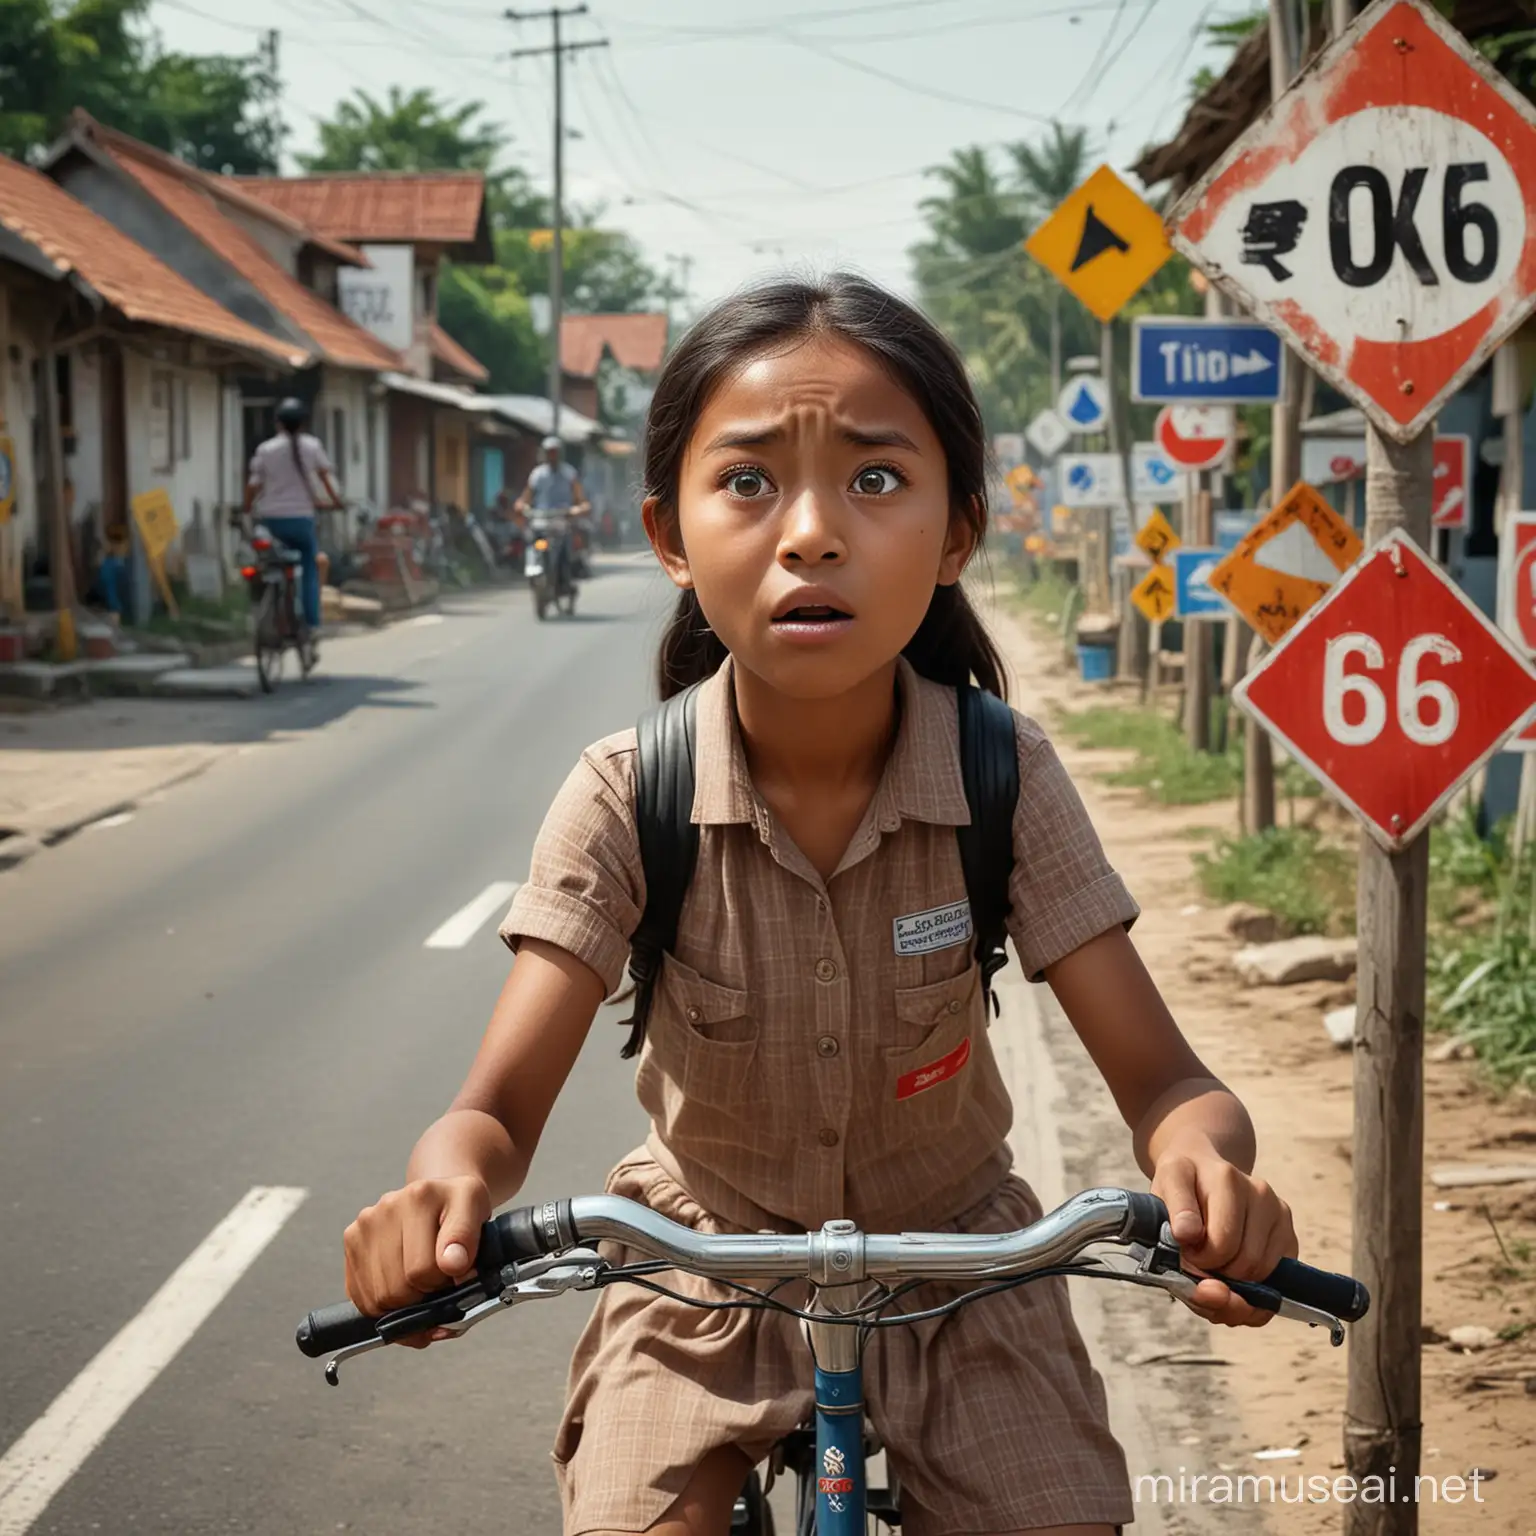 Indonesian Girl Cyclist Navigating Village Roads with Traffic Signs